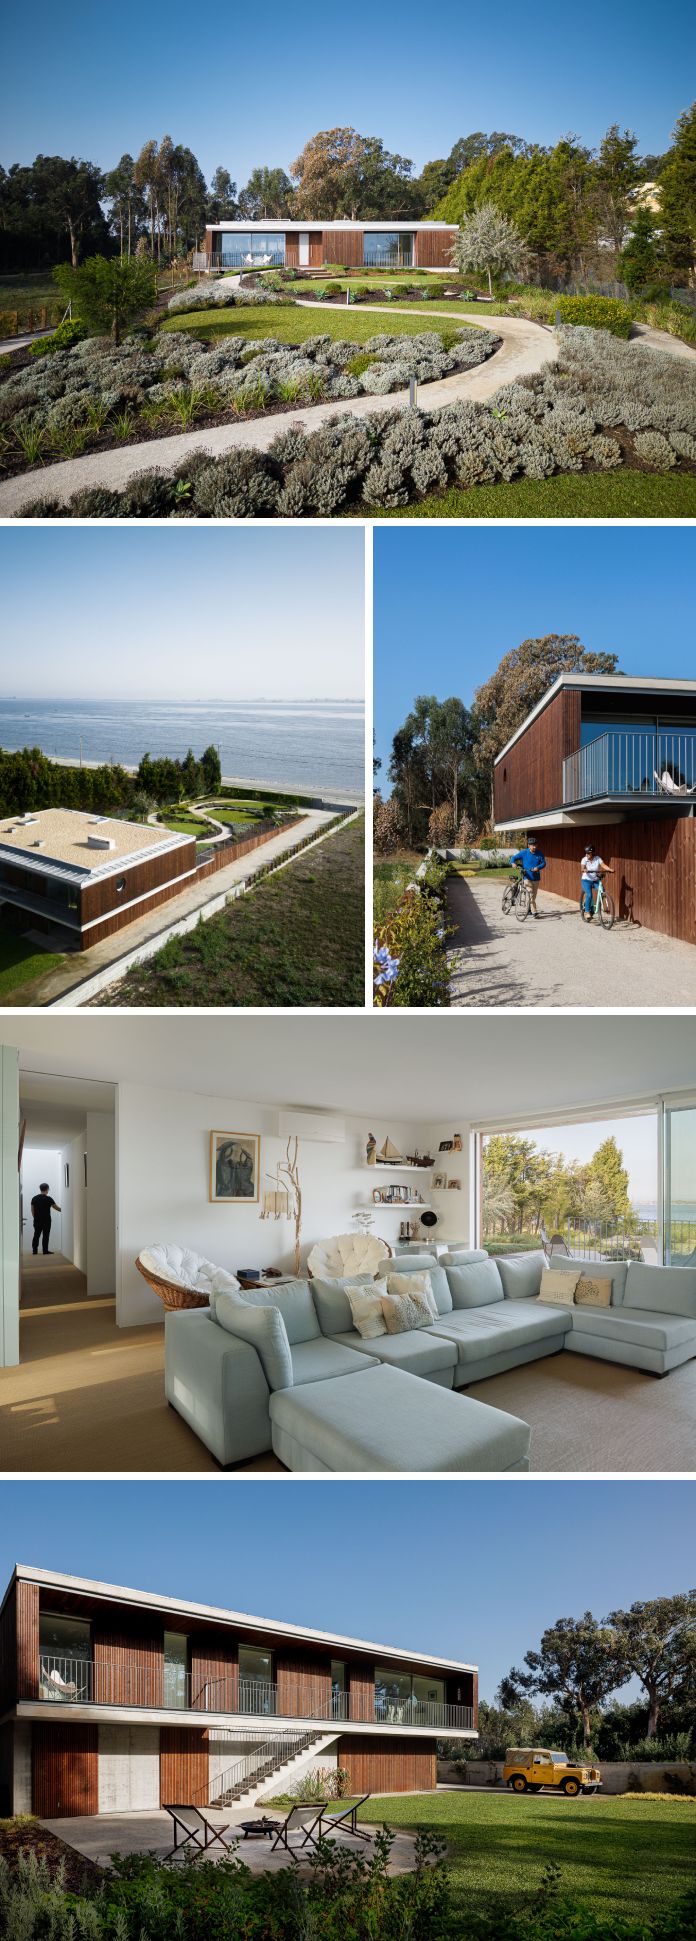 A holiday home between the sea and the Ria de Aveiro, designed by the architect Nuno Silva from numa architects.